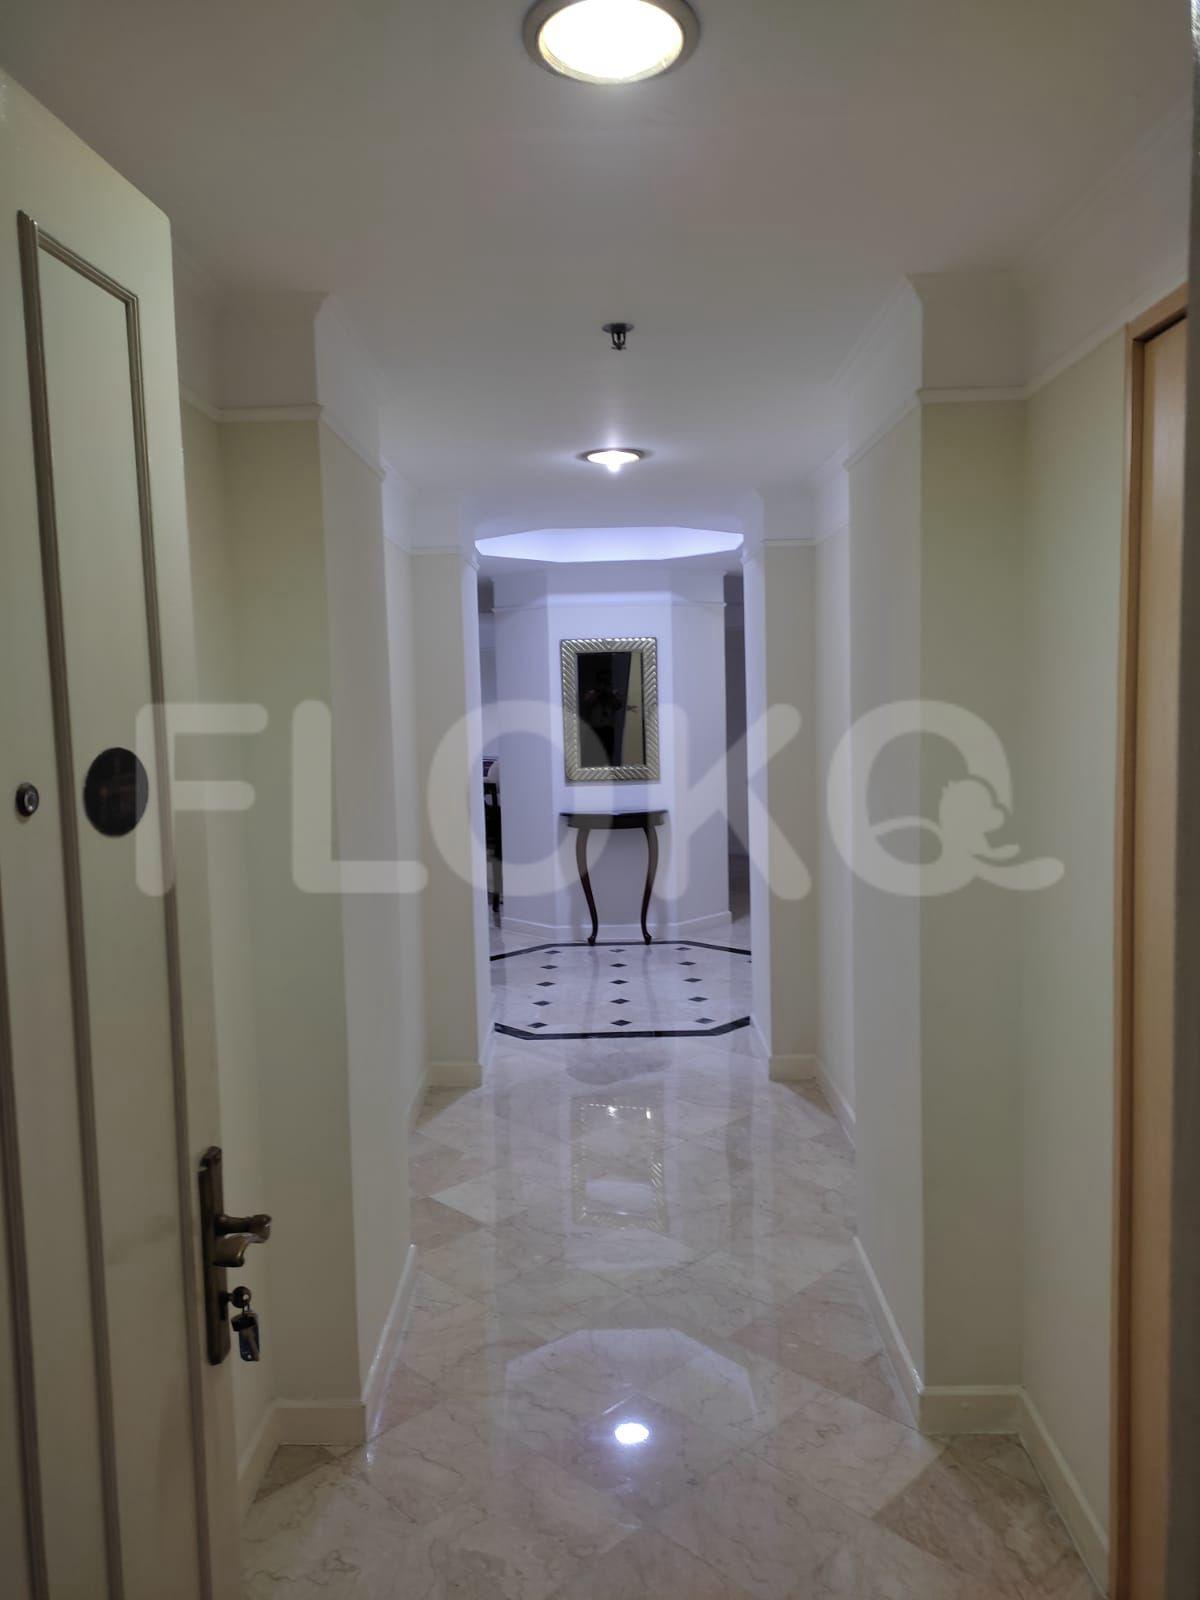 3 Bedroom on 3rd Floor fpo482 for Rent in Golfhill Terrace Apartment